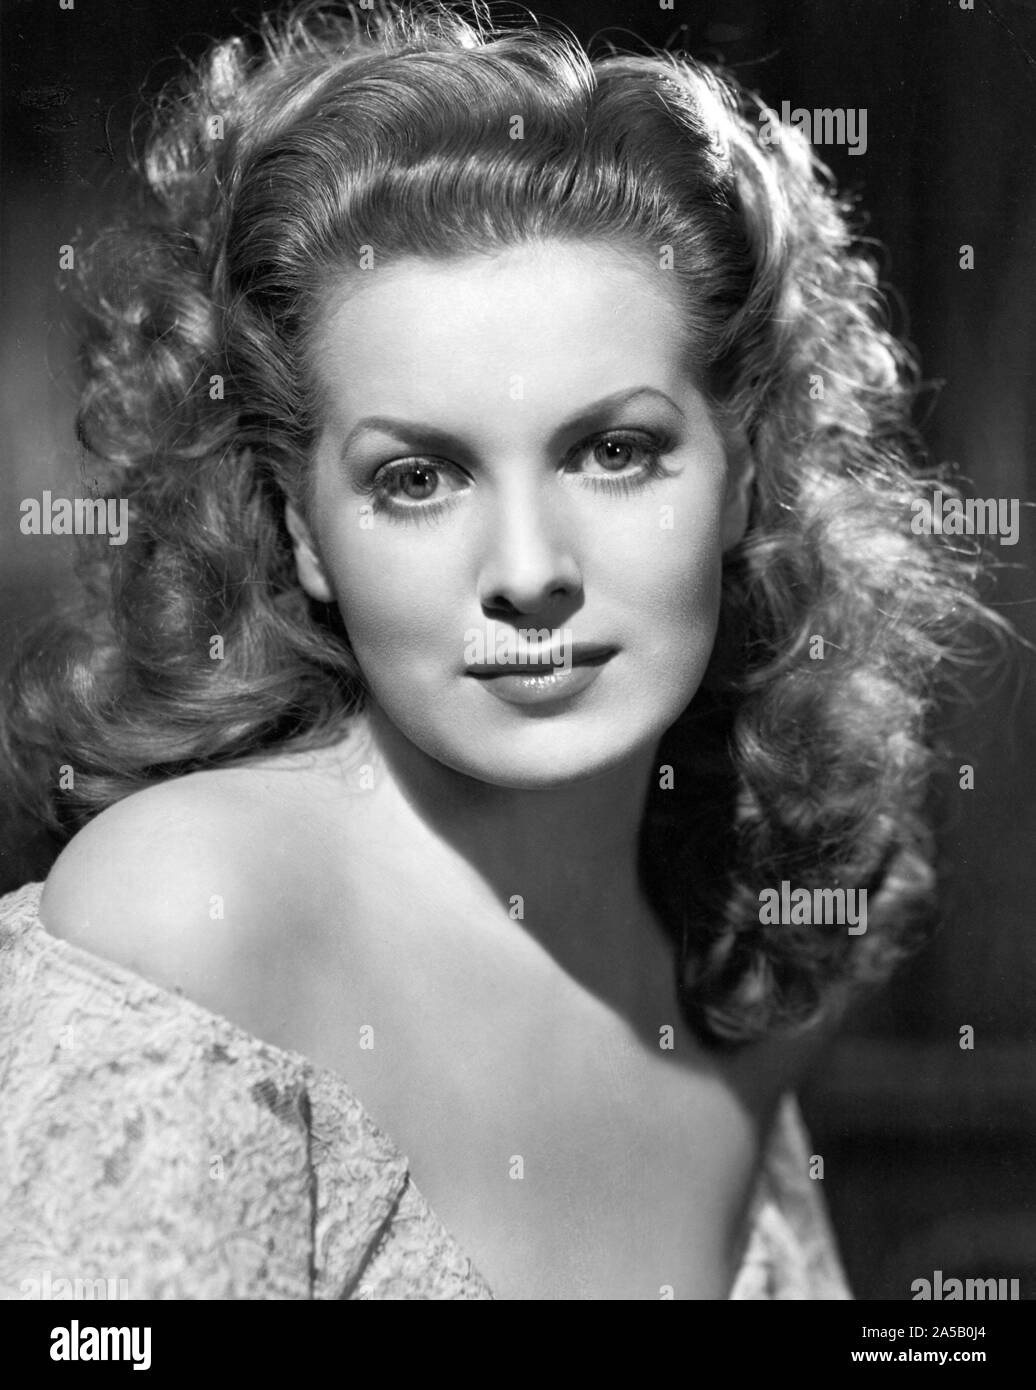 MAUREEN O'HARA in THE HUNCHBACK OF NOTRE DAME (1939), directed by WILLIAM  DIETERLE. Credit: RKO / Album Stock Photo - Alamy